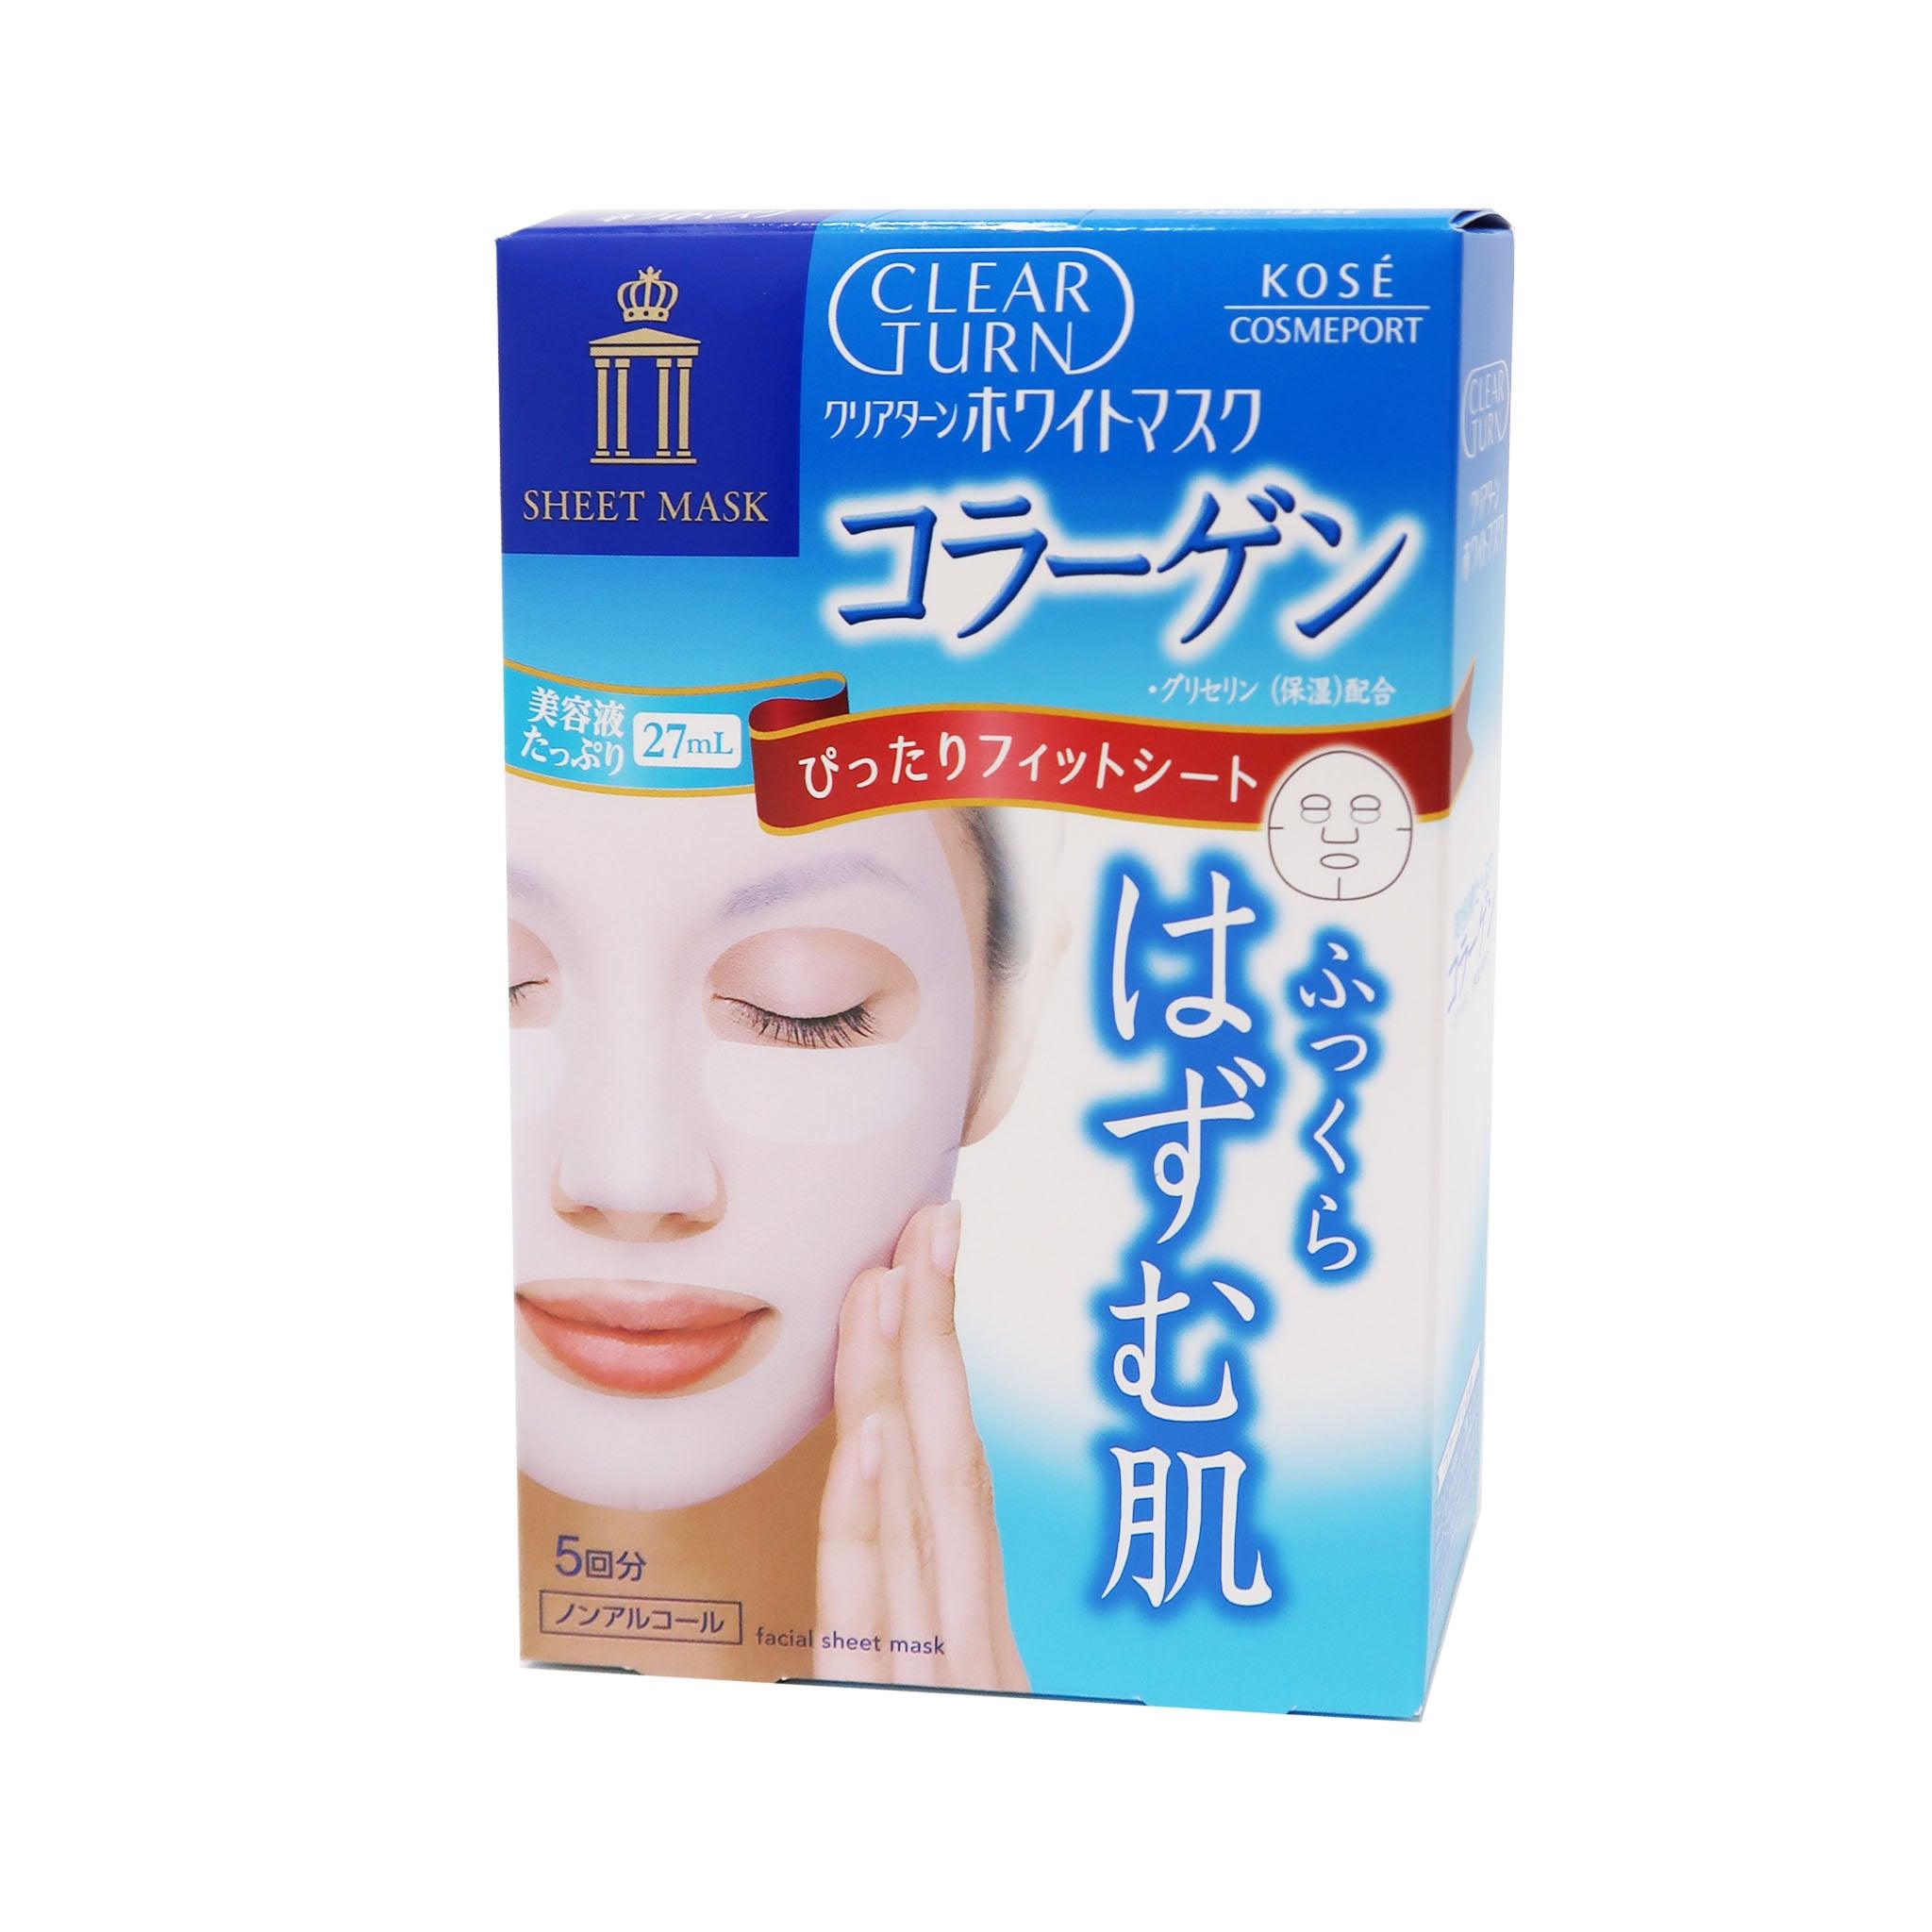 KOSE COSMEPORT Clear Turn White Mask - Collagen [5PC]